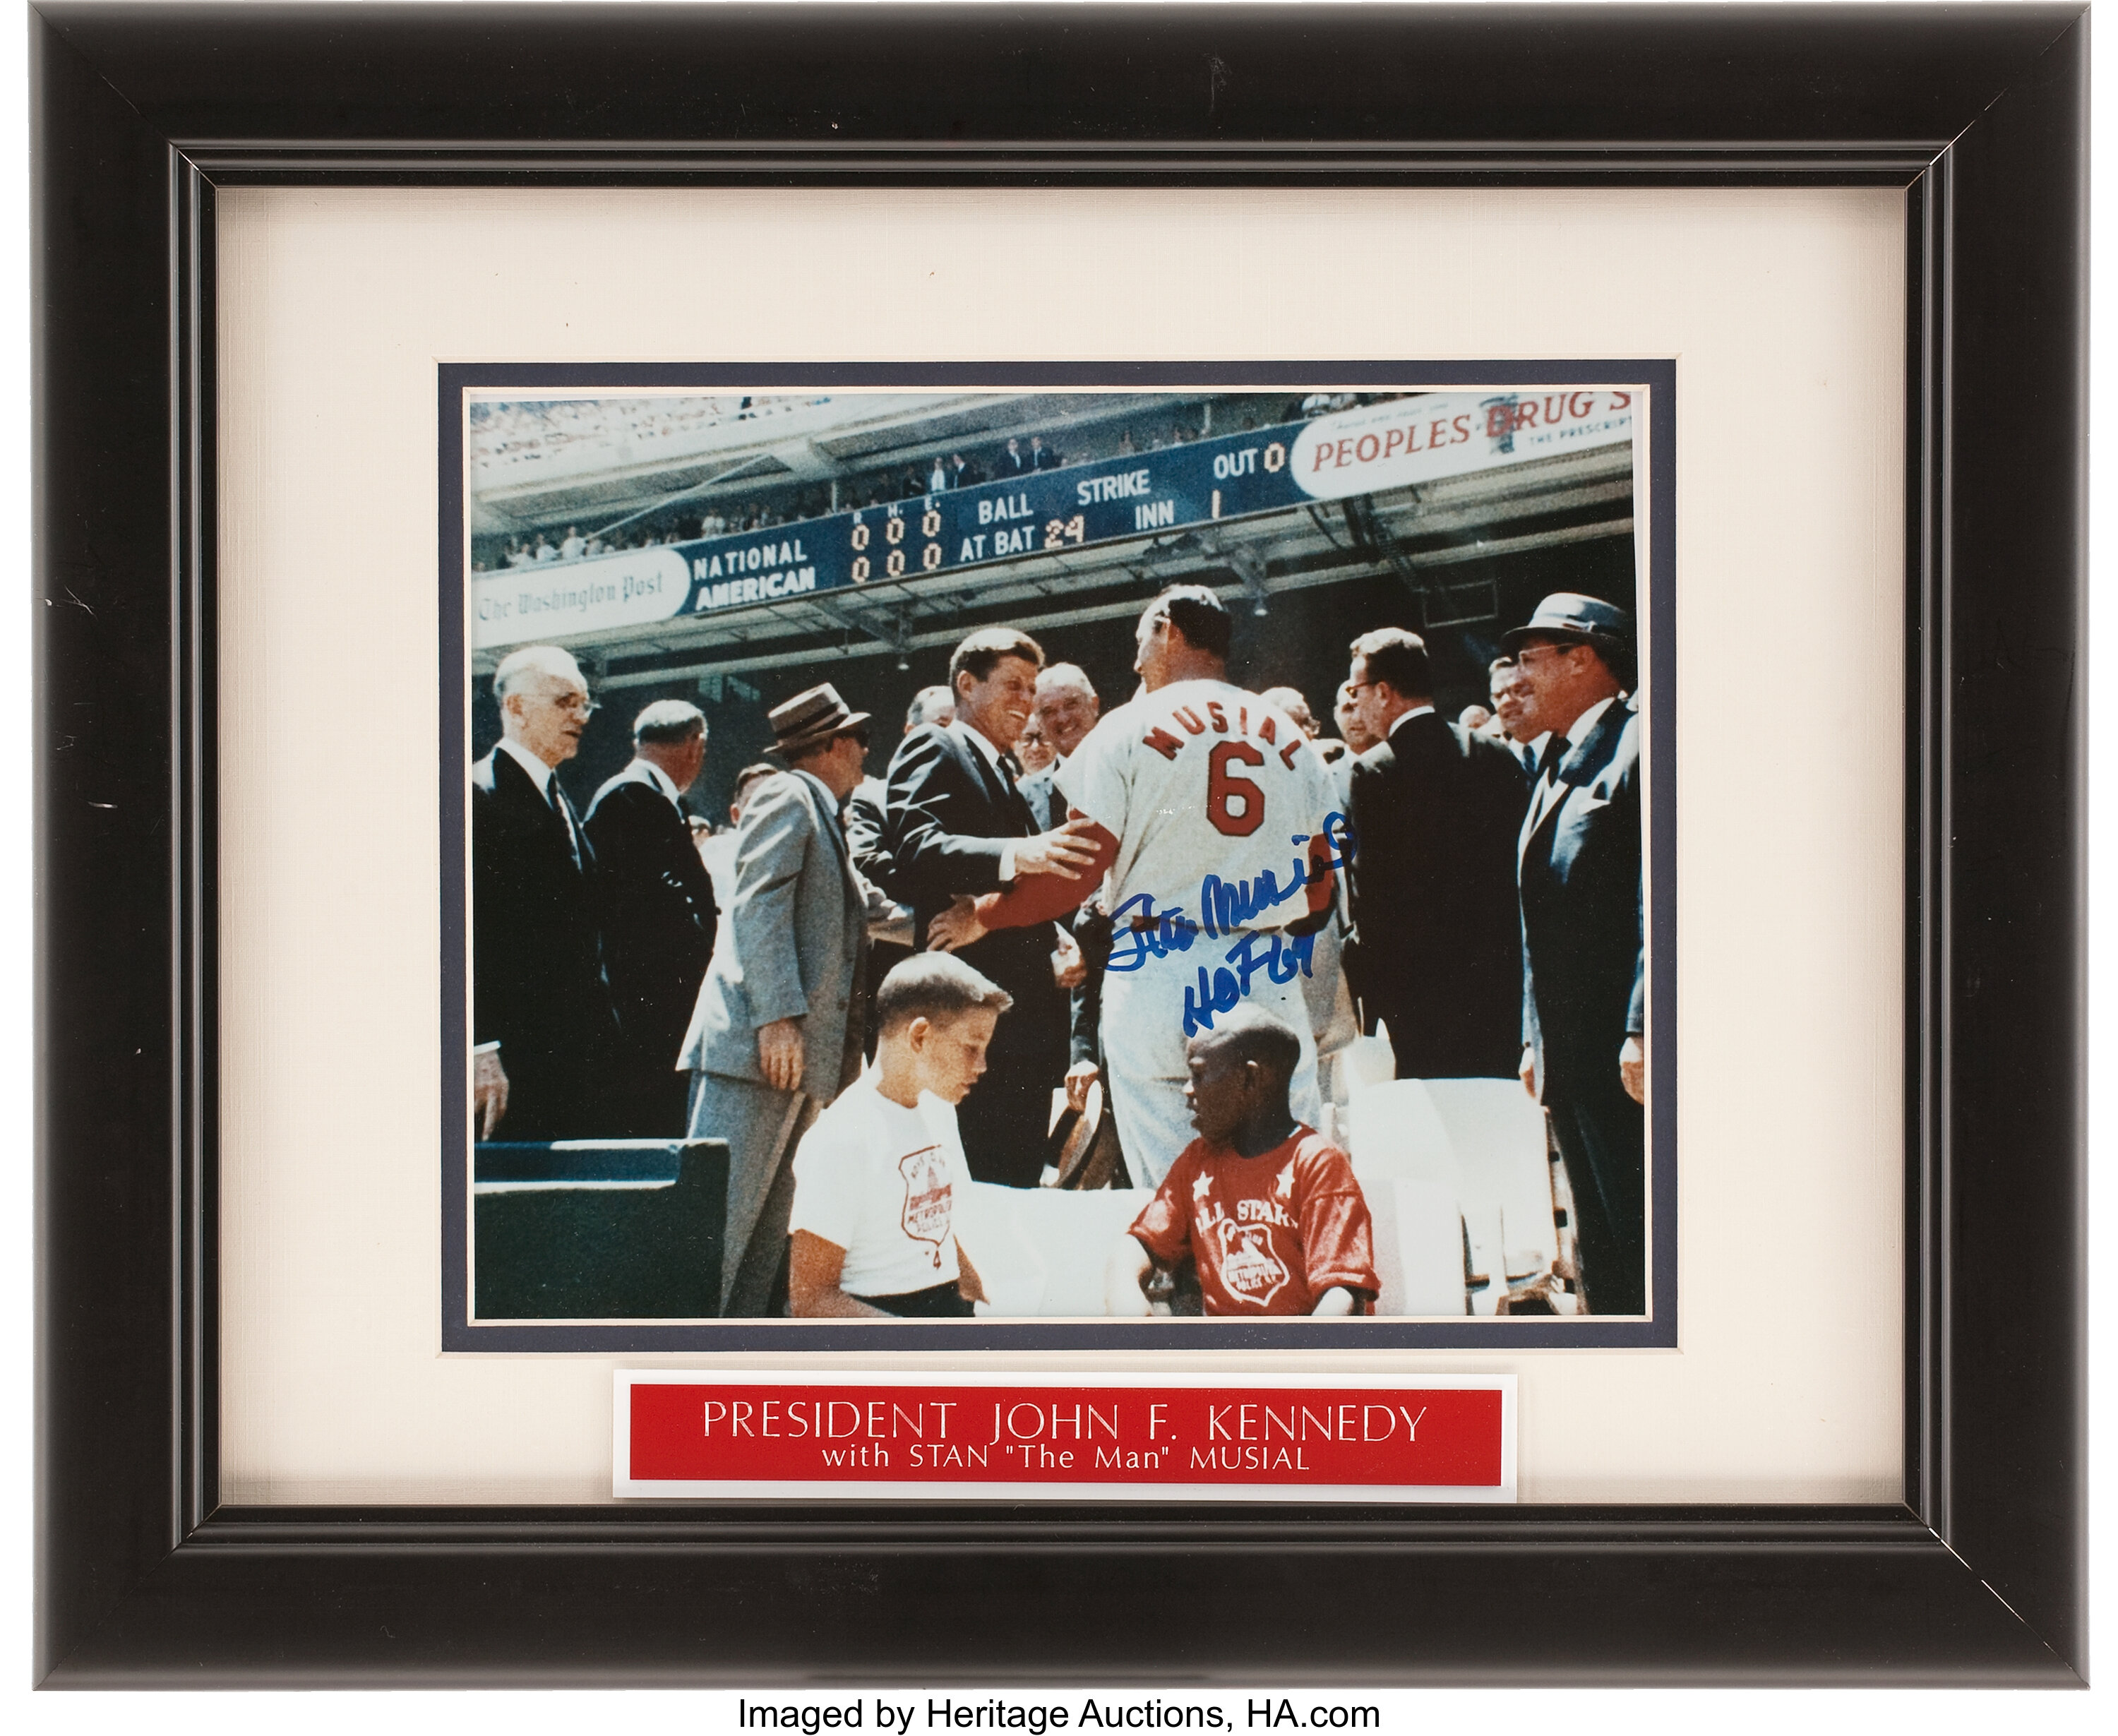 Charitybuzz: Stan Musial Signed & Framed St. Louis Cardinals Photo with JFK